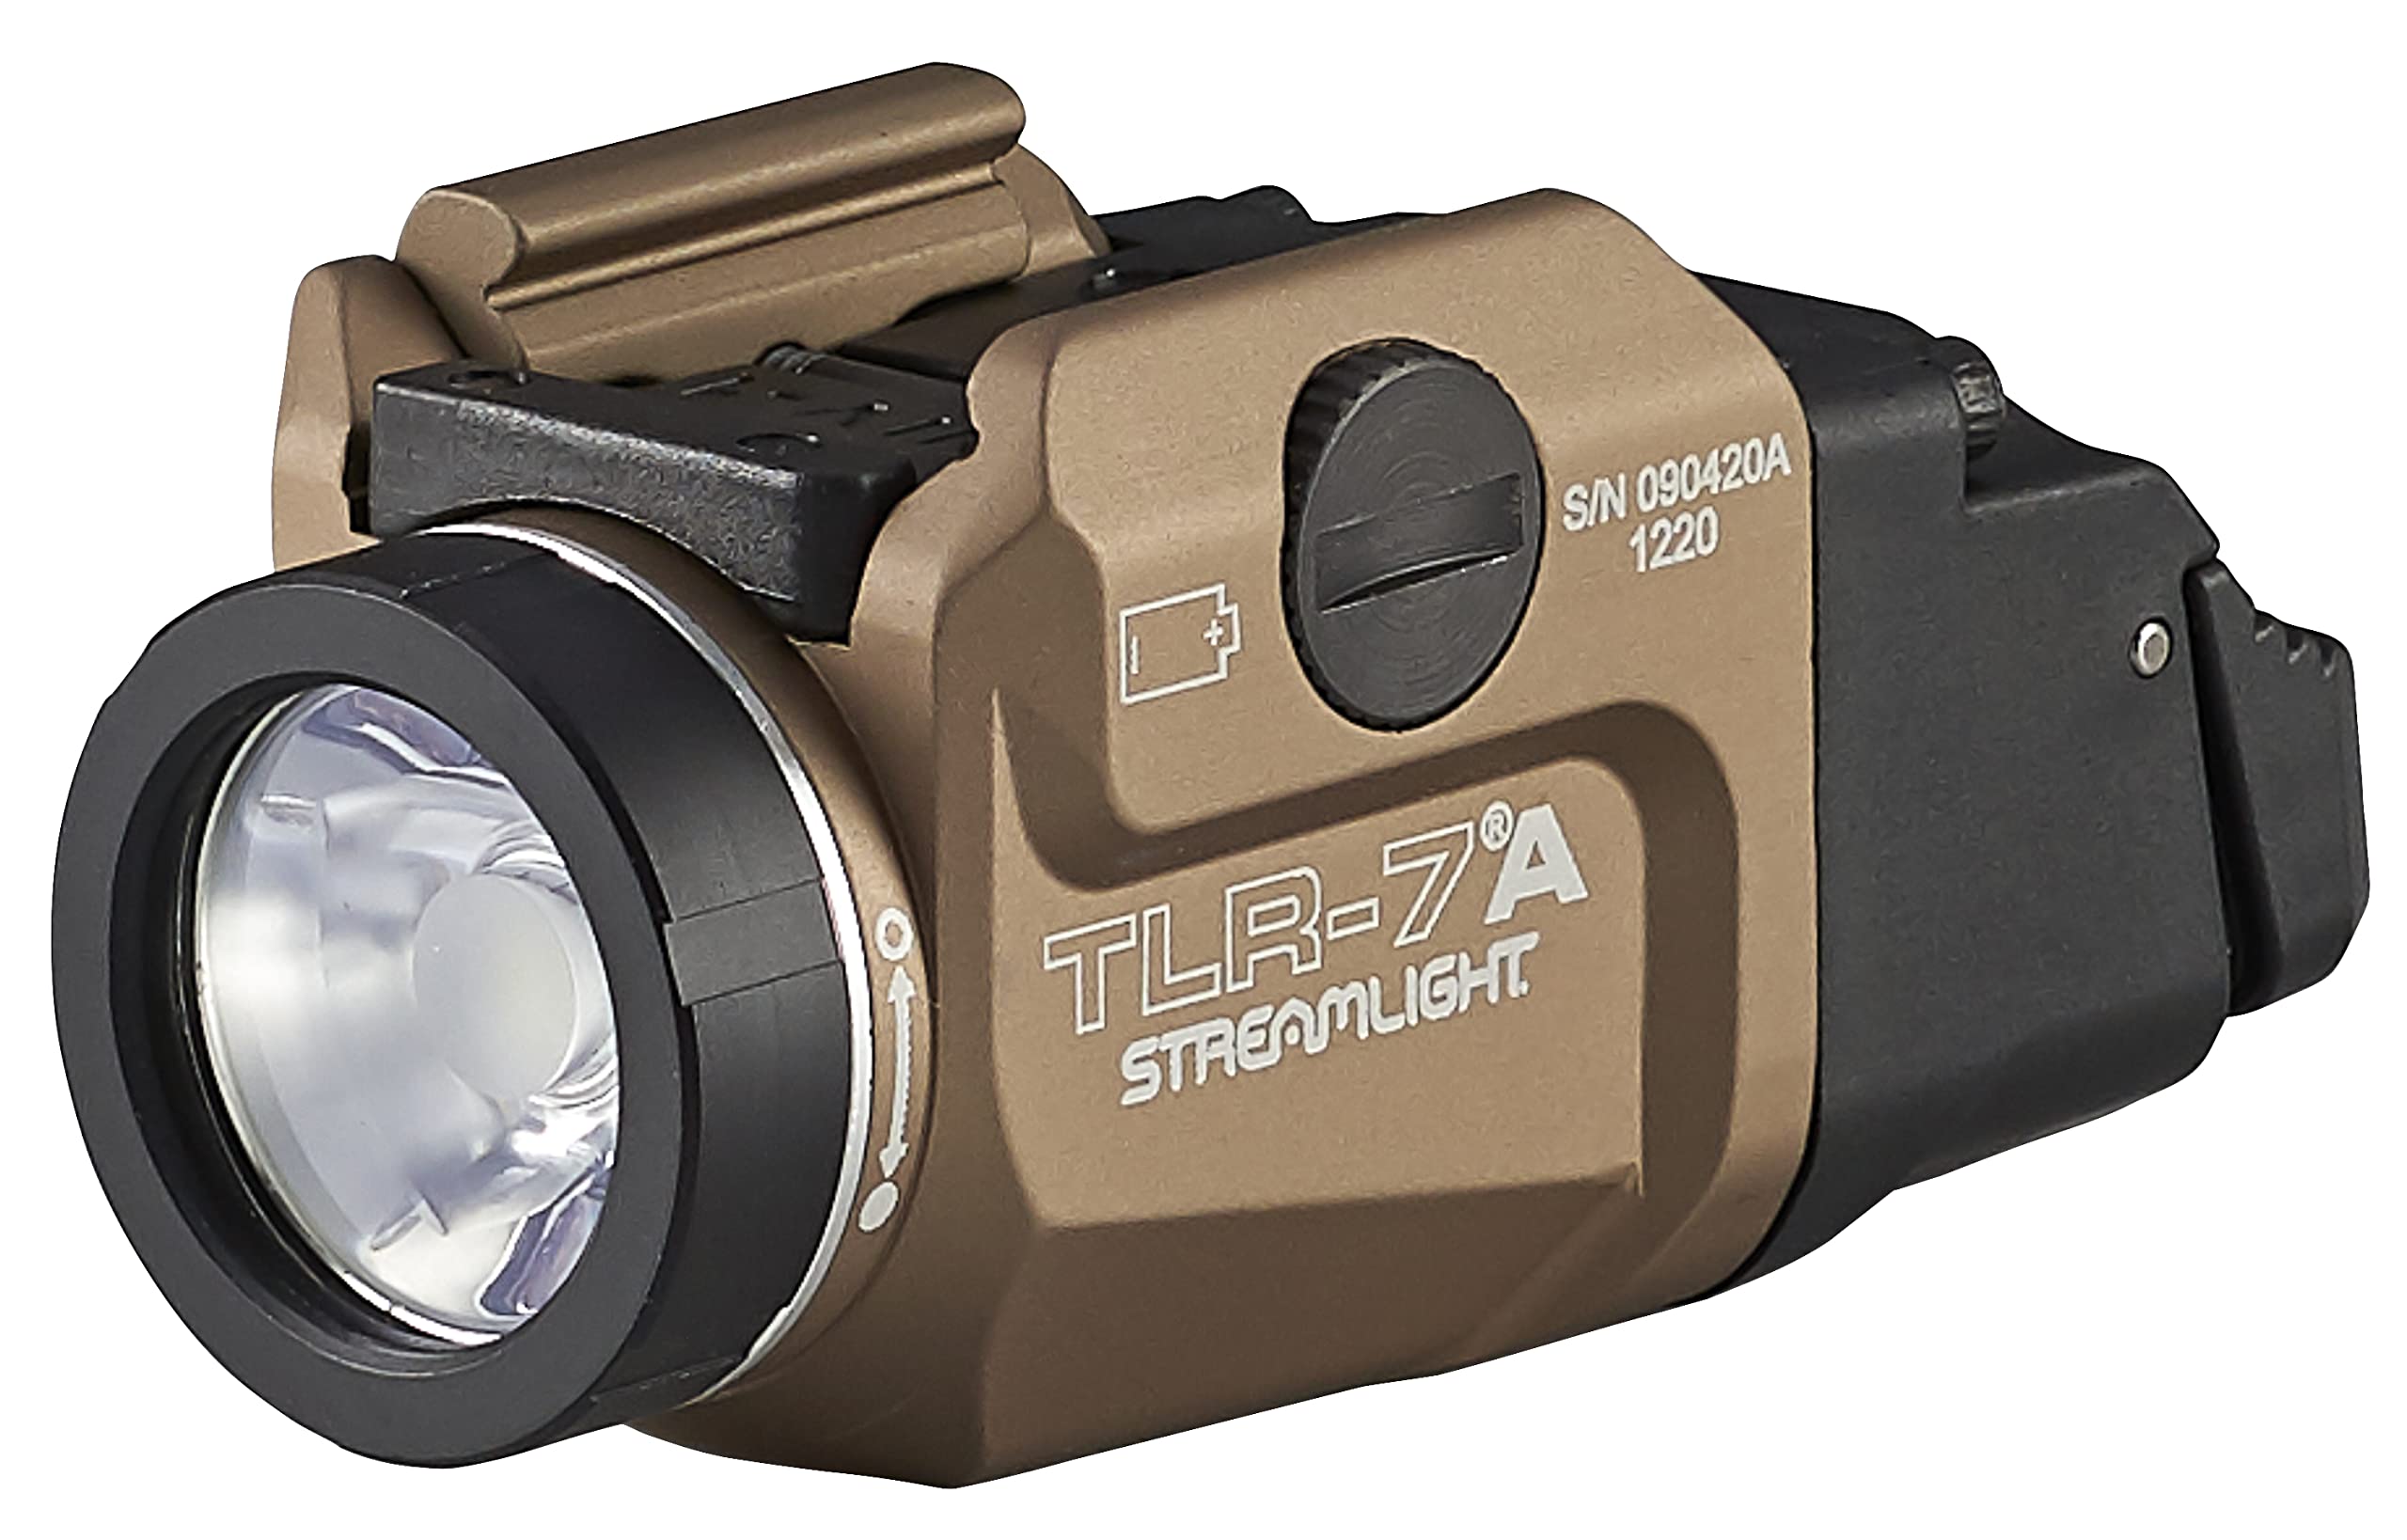 Streamlight 69429 TLR-7A Flex 500-Lumen Low-Profile Rail-Mounted Tactical Light, Includes High Switch Mounted on Light Plus Low Switch in Package, Battery and Key kit, Flat Dark Earth, Box Packaged